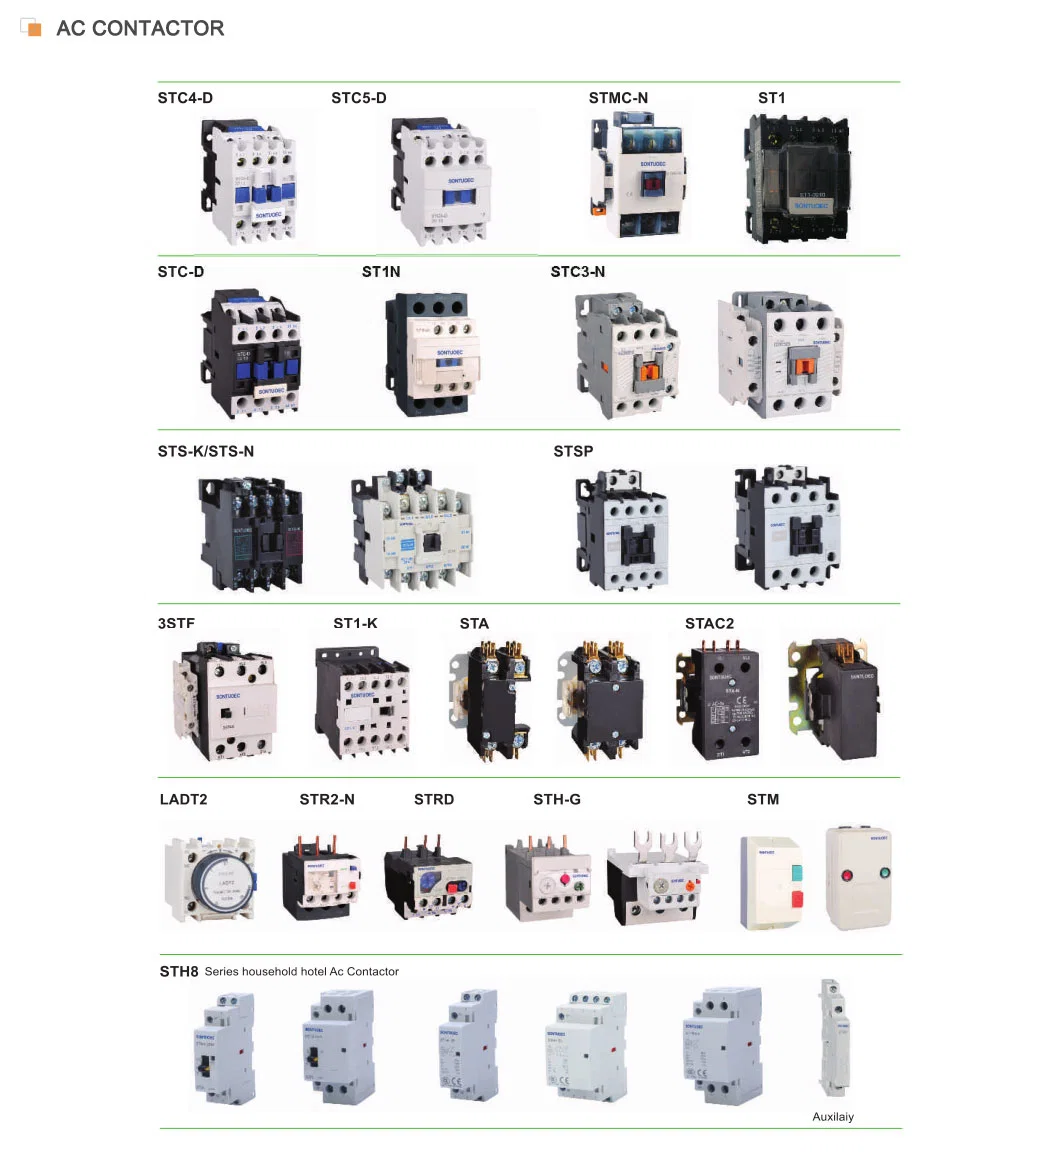 Hot Product Stac2 Series AC Air Conditioning Contactor Stac2